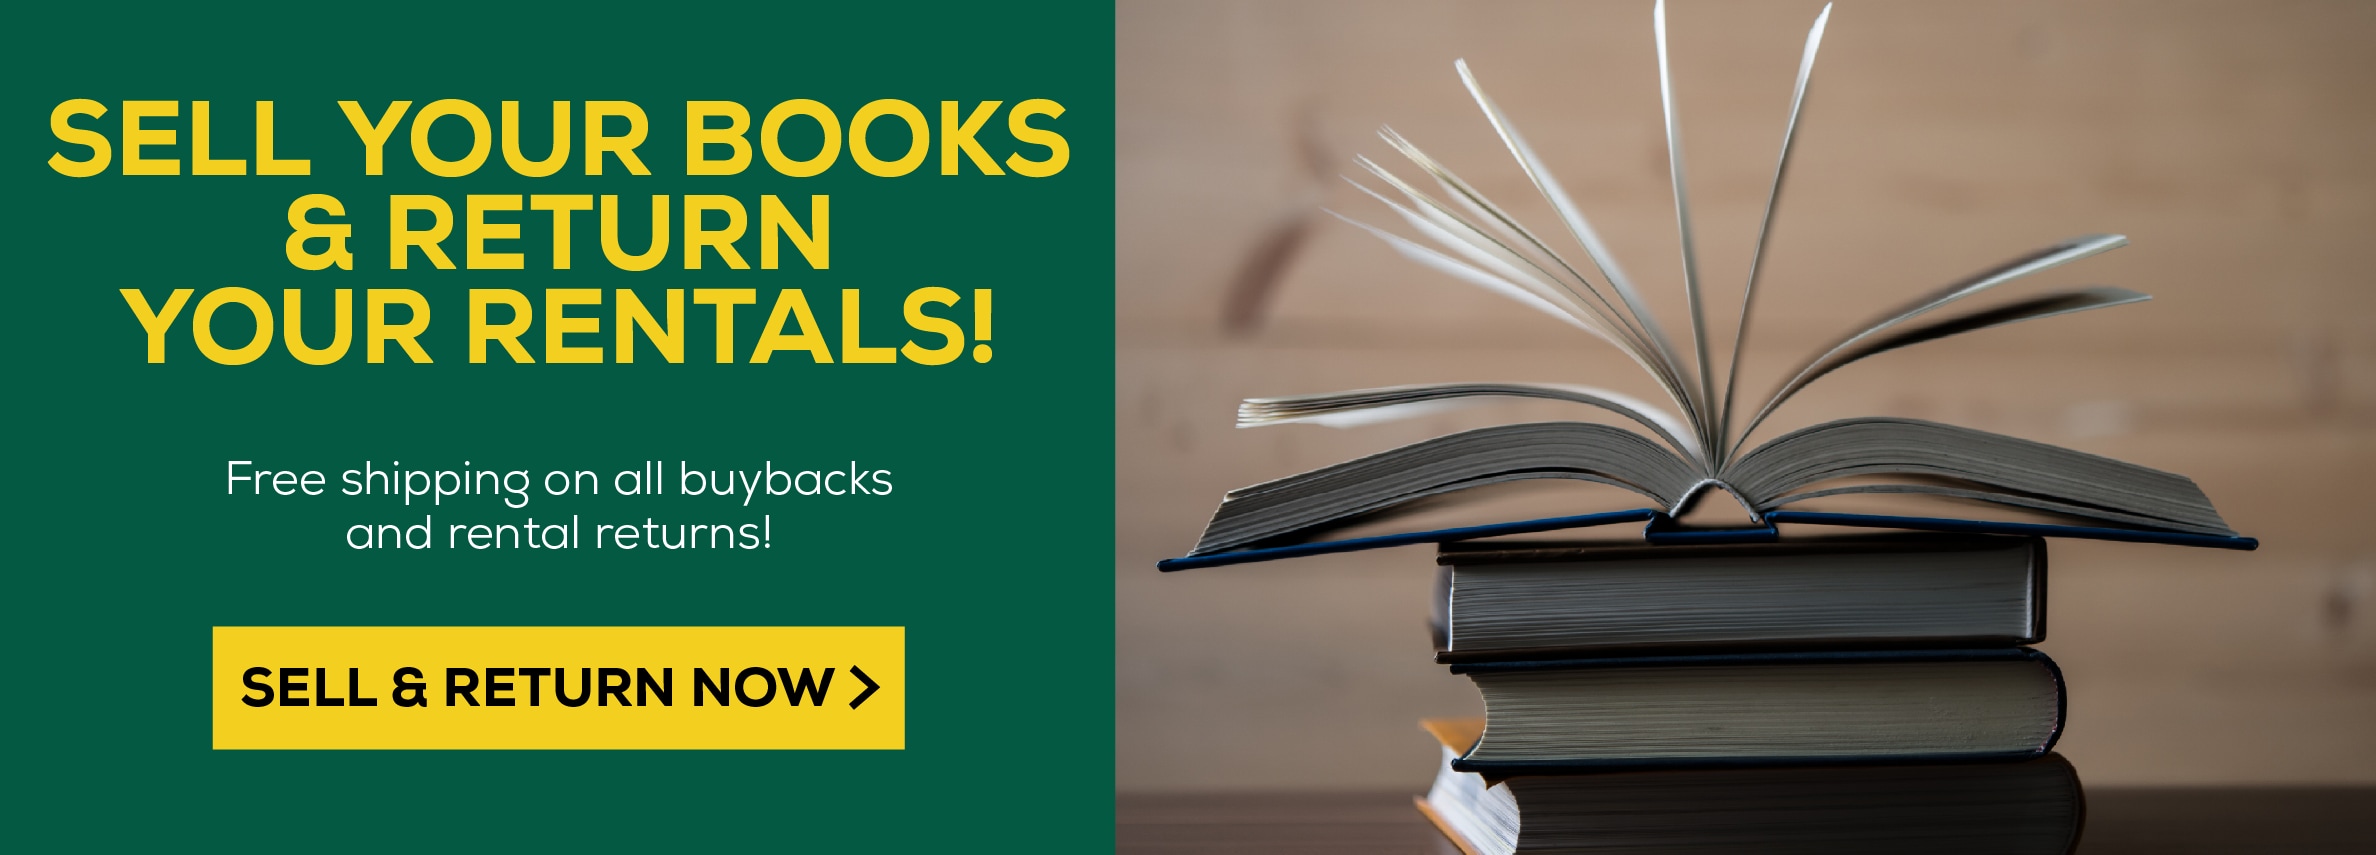 Sell your books and retrun your rentals! Free shipping on all buyback and rental returns. sell and return now